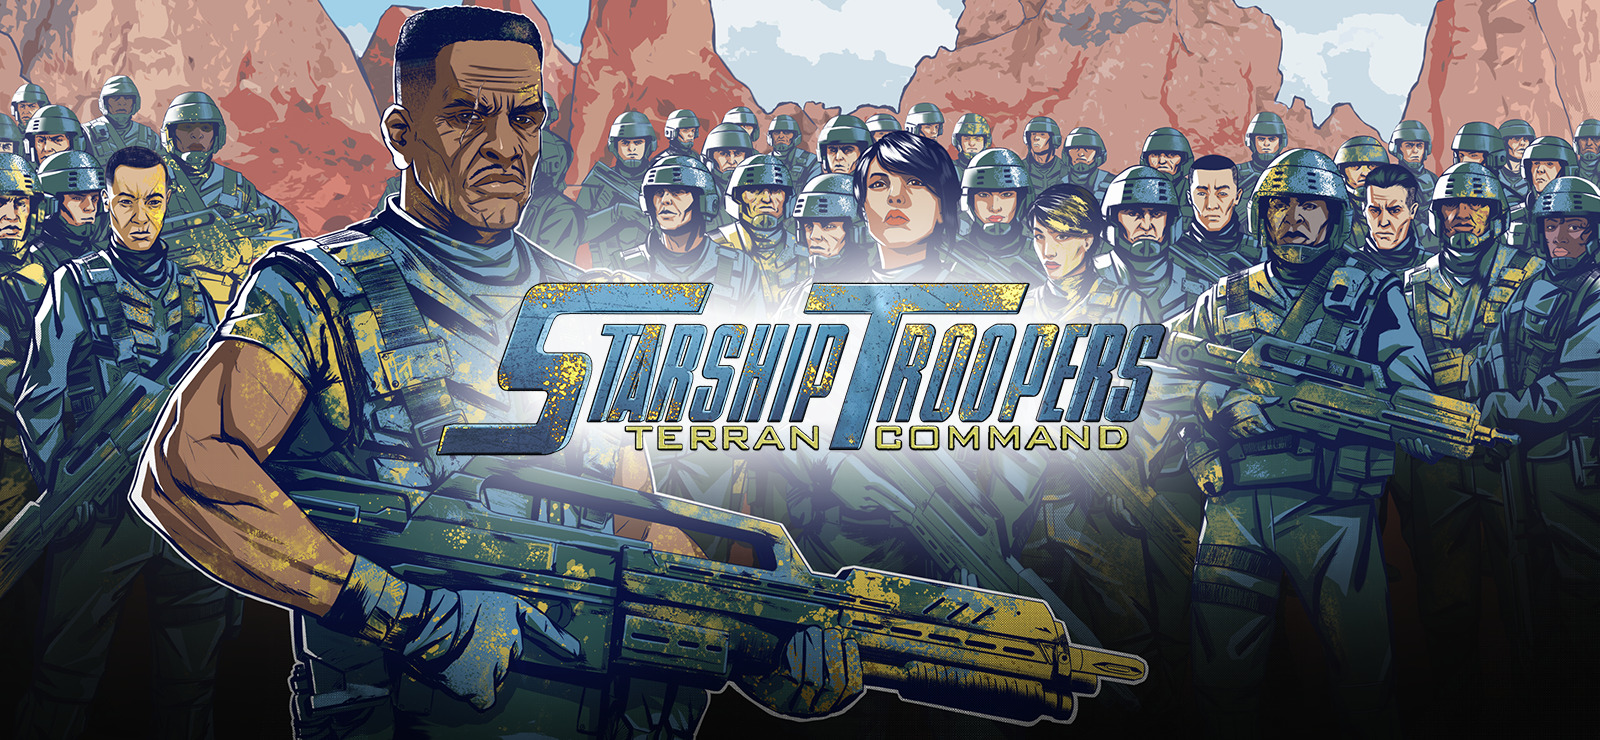 how to play starship troopers terran command on mac